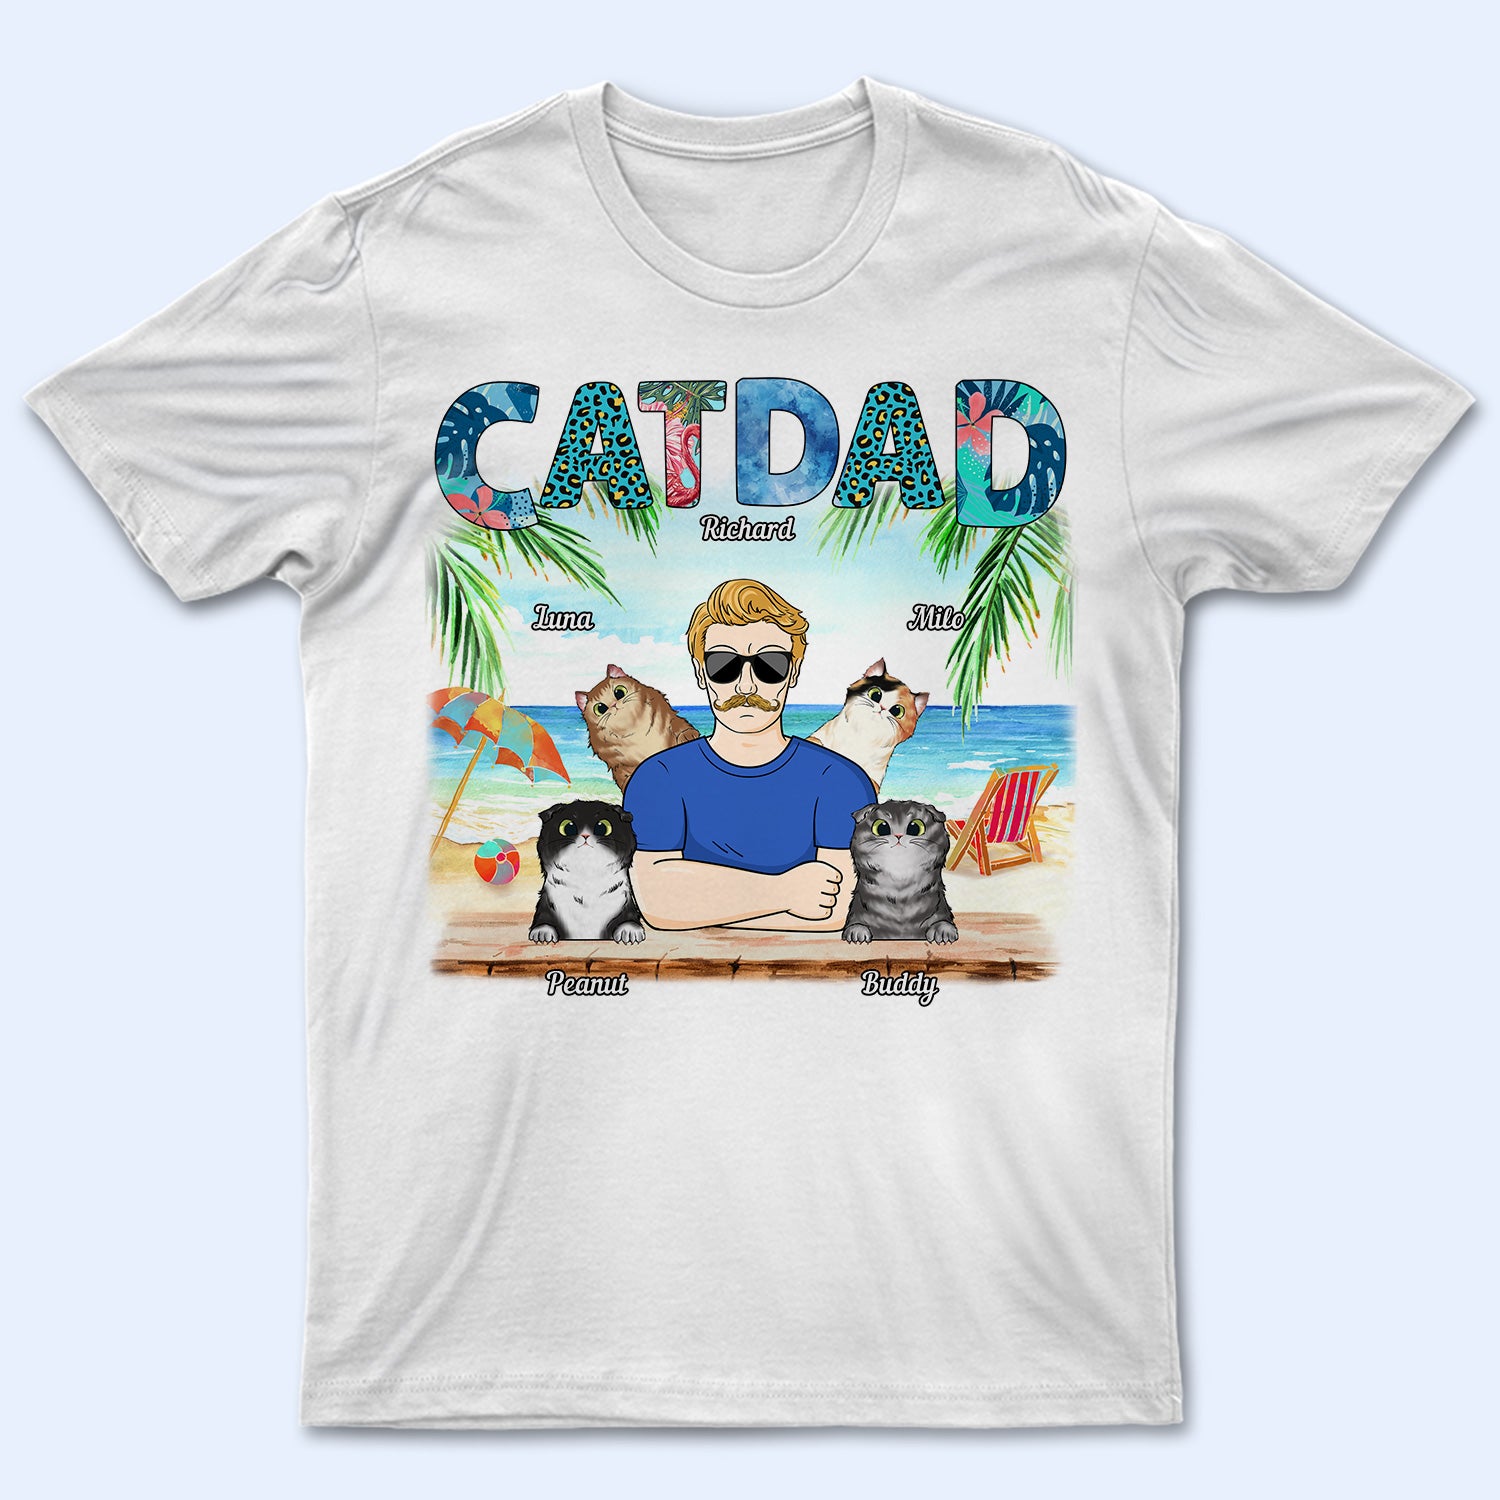 Cat Dad Tropical Beach Sea Ocean - Birthday, Summer Gift For Father, Grandpa, Husband, Pet Lovers - Personalized Custom T Shirt